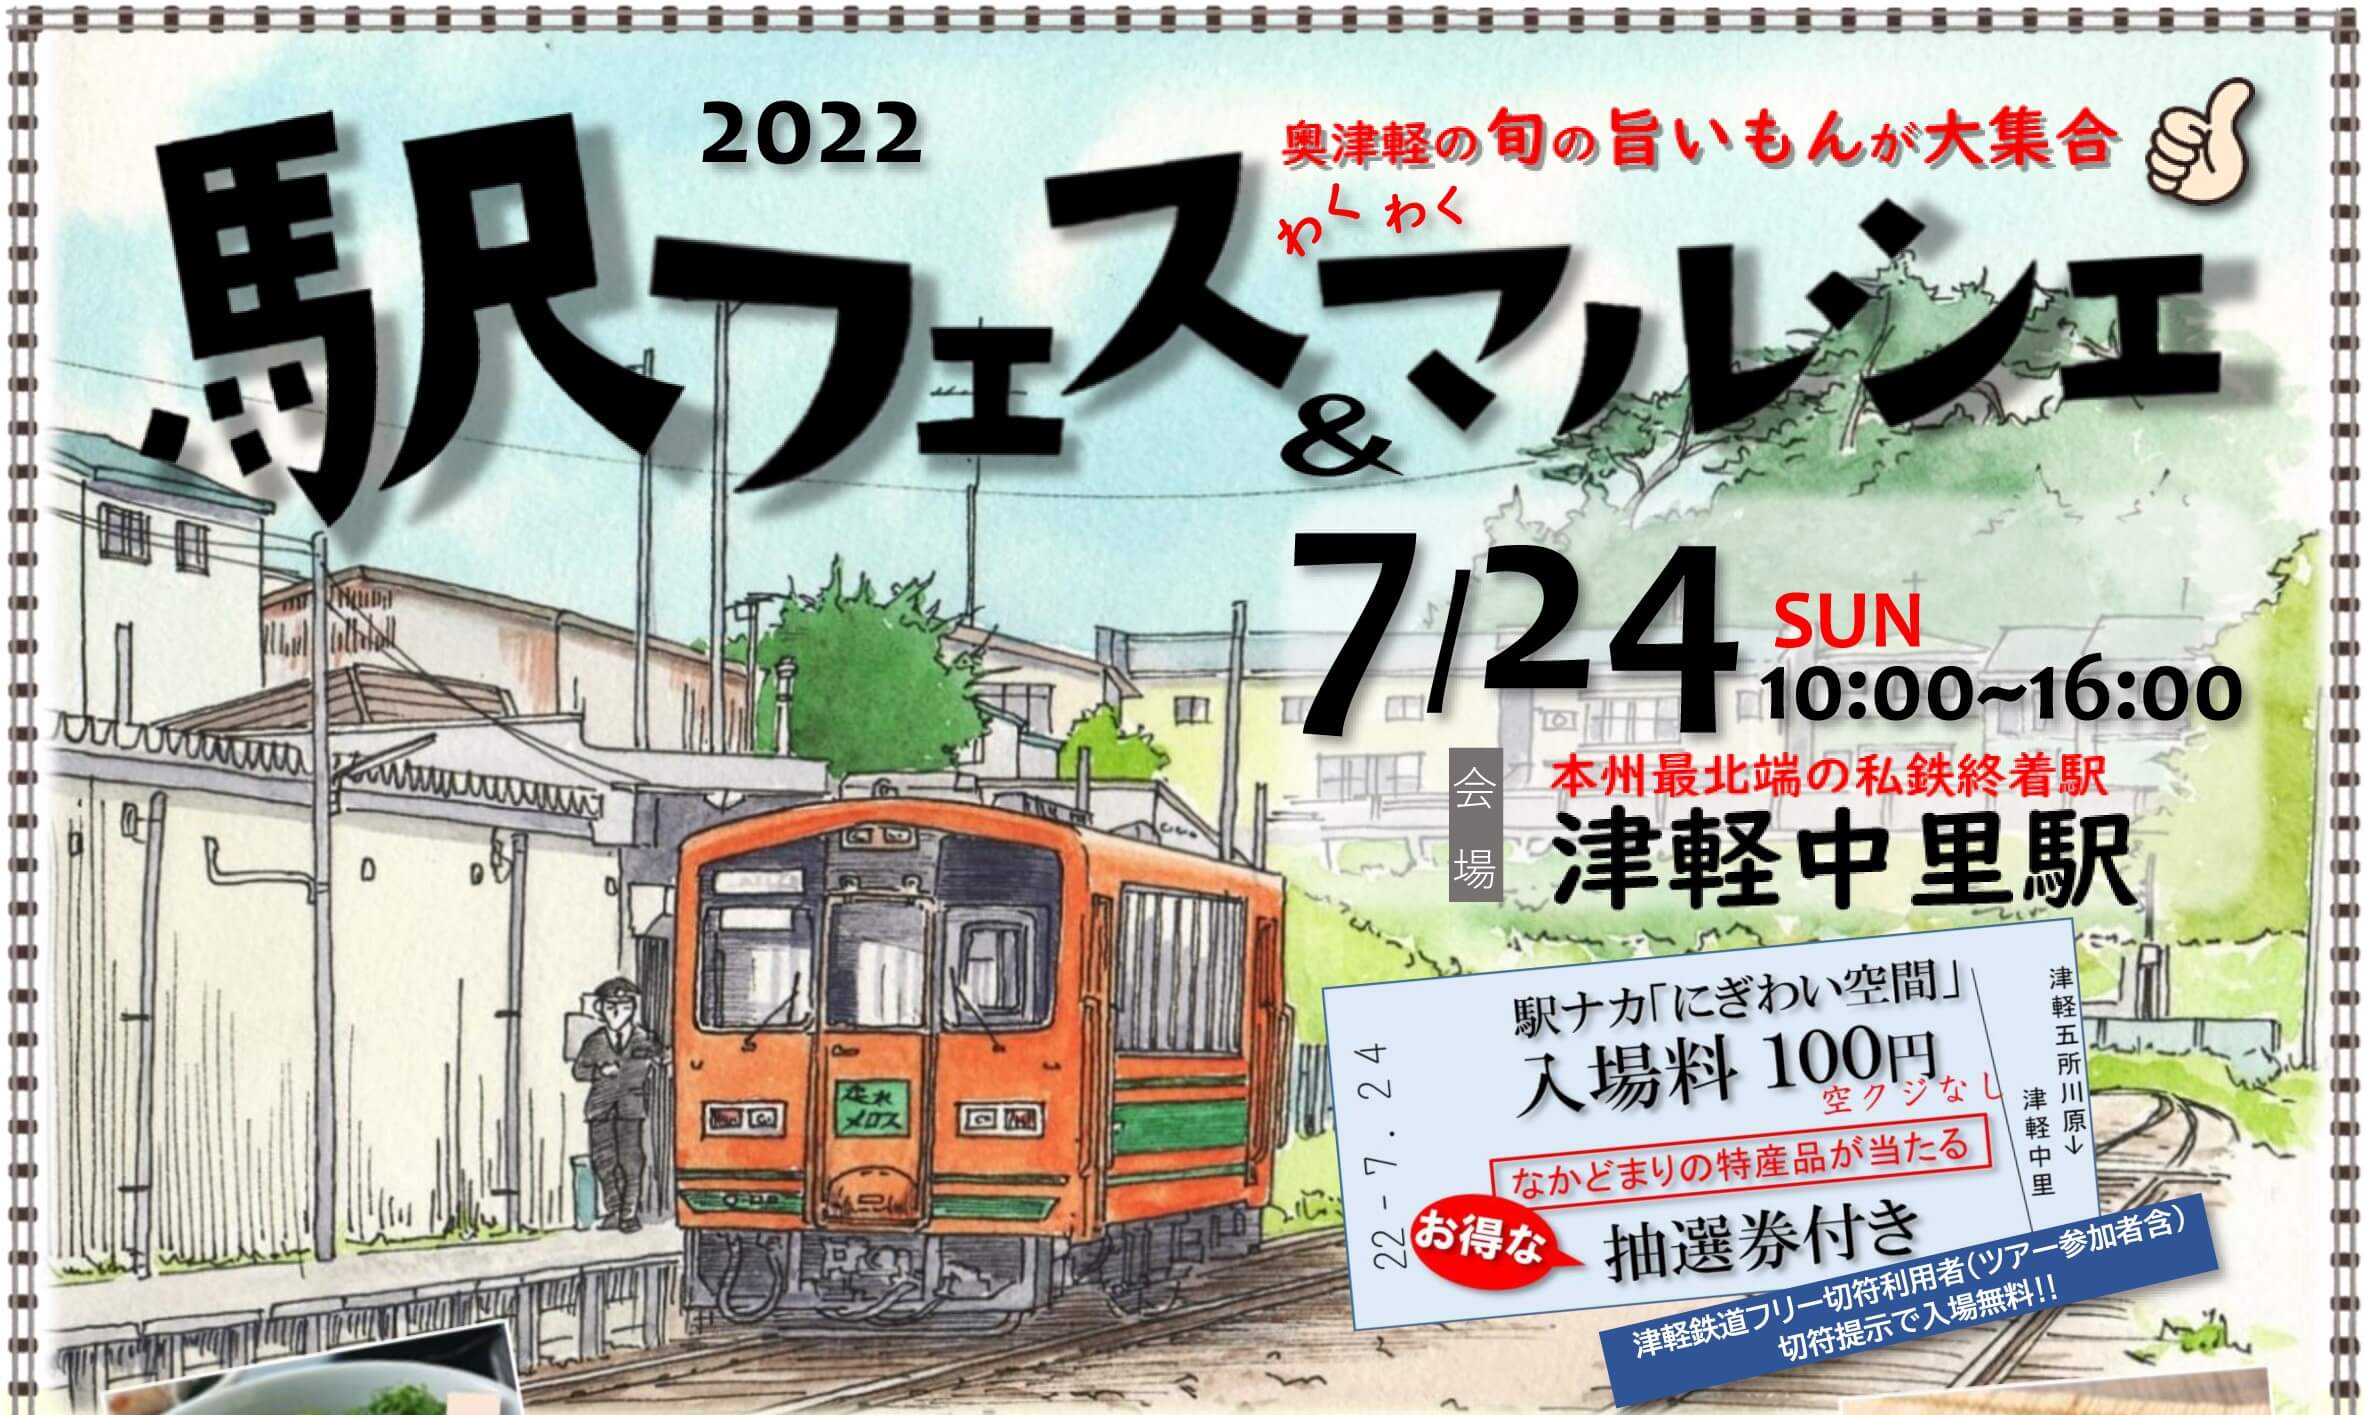 Featured image for “7月24日(日)開催！！ 2022駅フェス＆マルシェ in津軽中里駅”